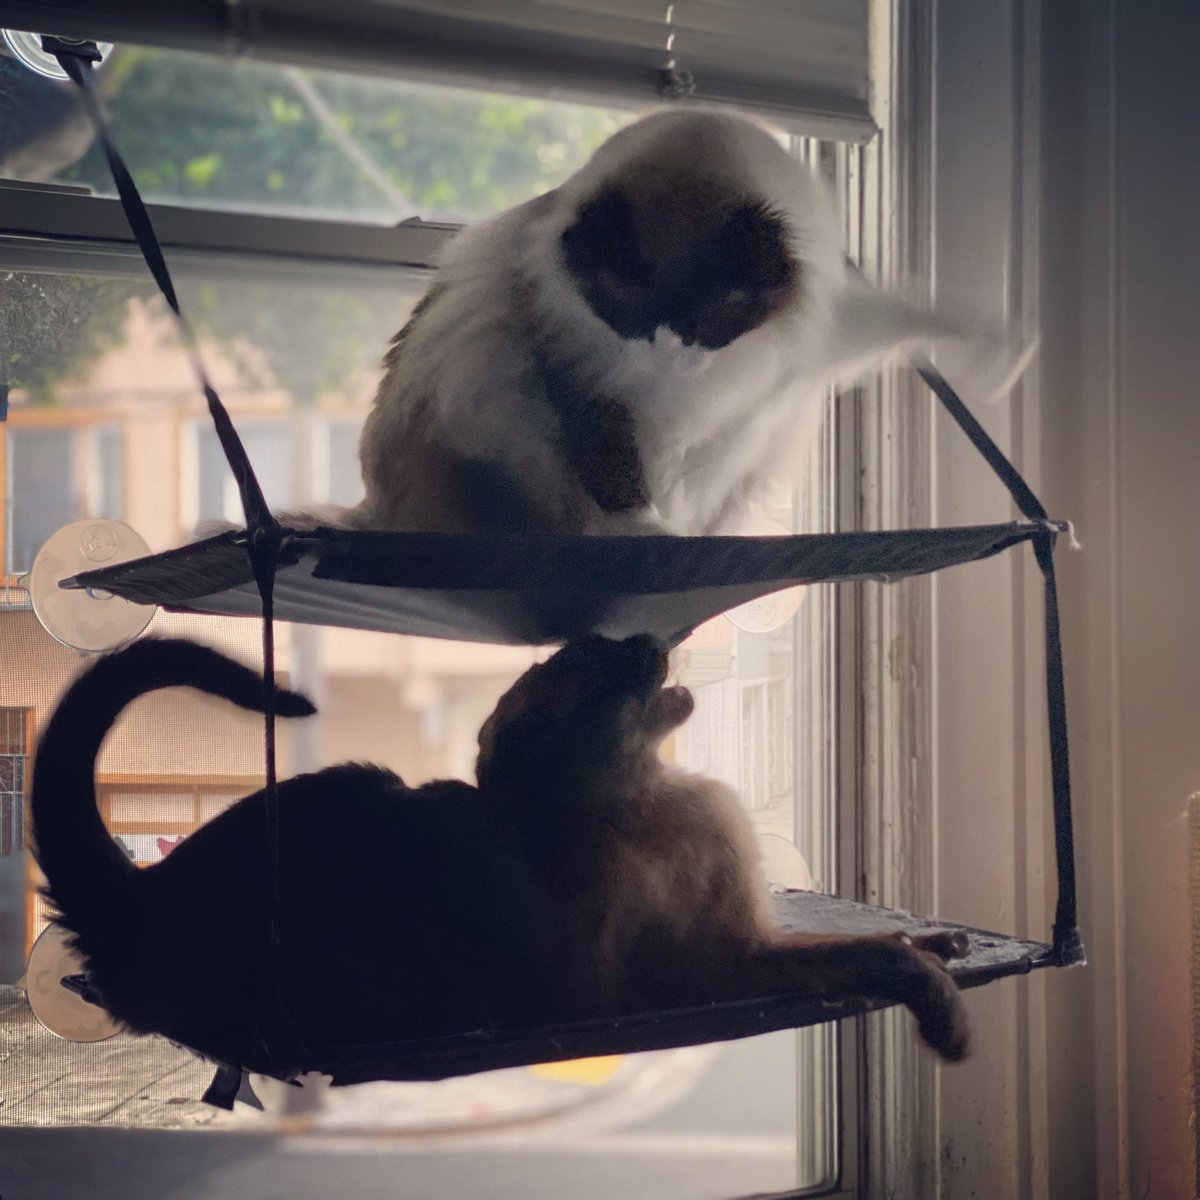 We’ve had a busy Monday 😺!

@tippyandmerle 

#Monday #MondayMood #Busy #Cat #Fight #Play #CatsOfSanFrancisco #SnowshoeCat #SnowshoeSiamese #SiameseCat #Siamese #AdoptDontShop #RescueCat #TippyAndMerle #MeowMeow